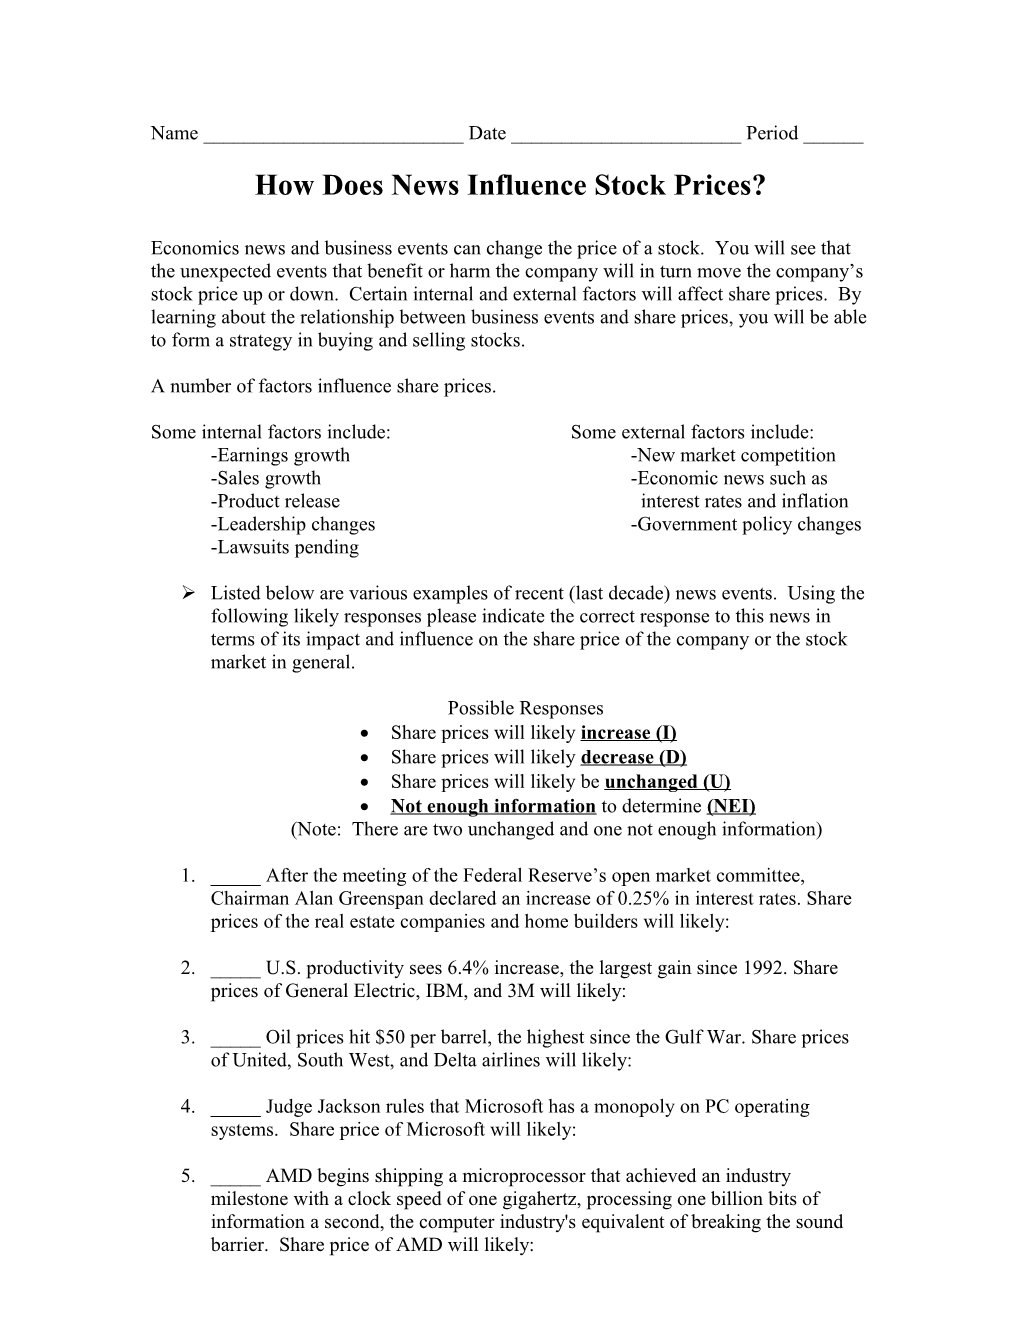 How Does News Influence Stock Prices?